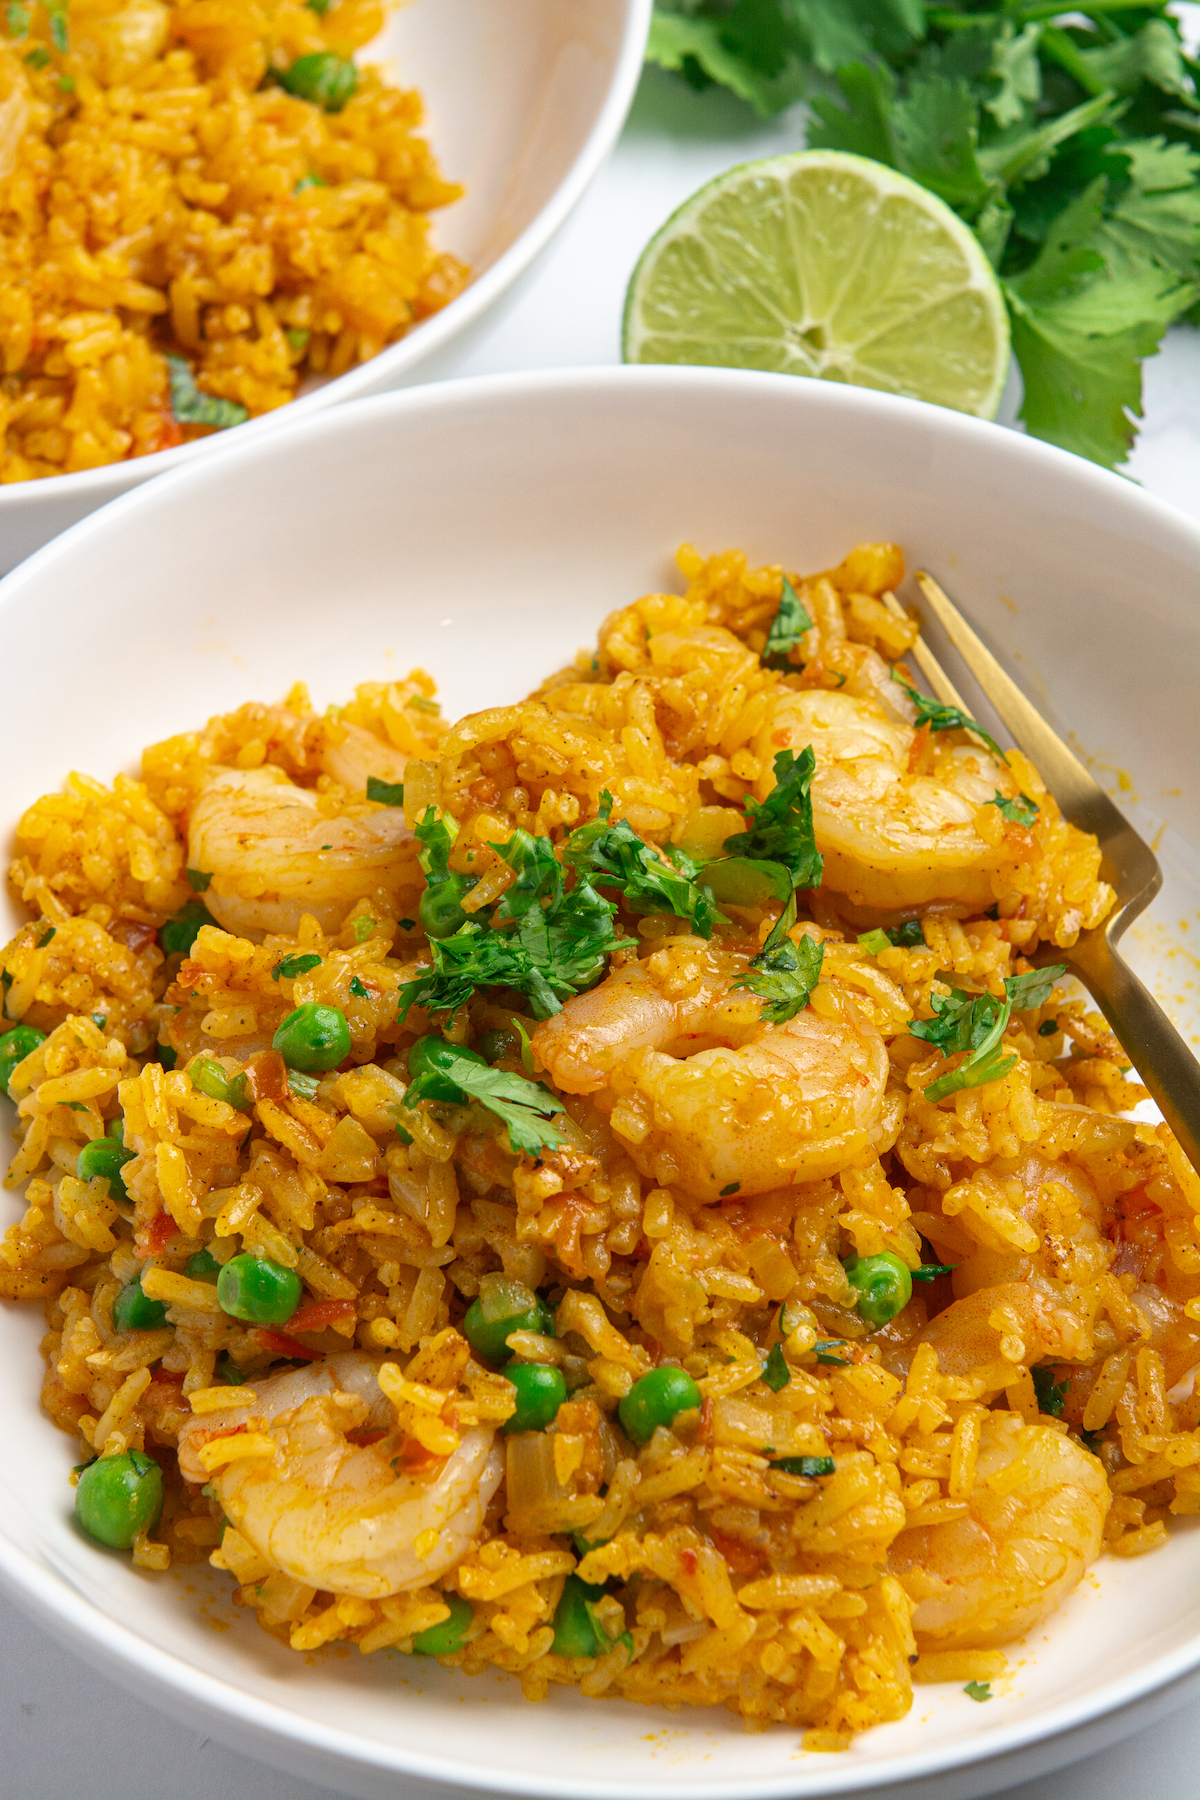 A dish with arroz con camarones or shrimp and rice, peas, and cilantro with a fork on the side.